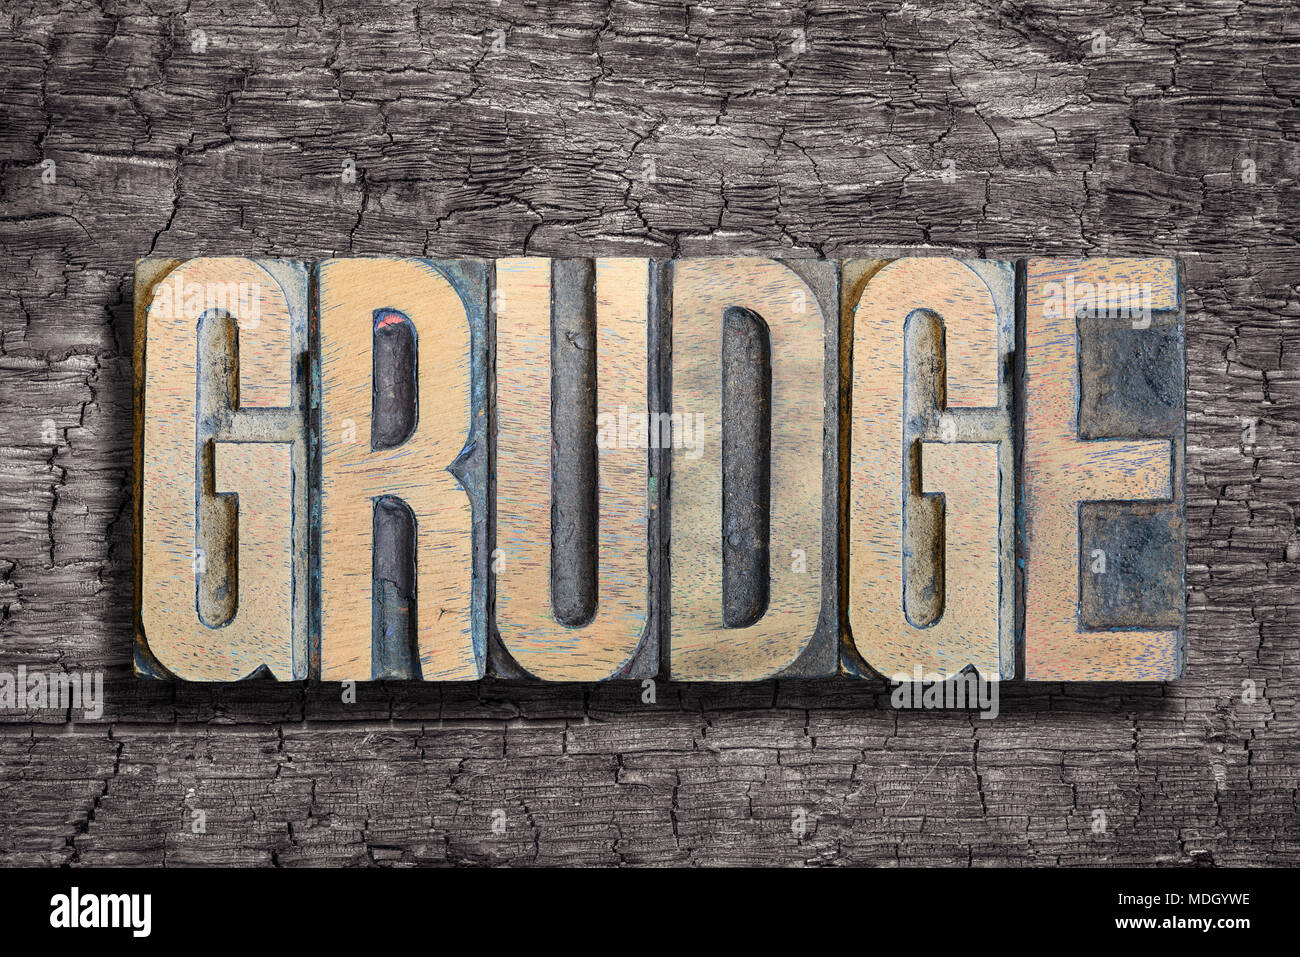 grudge word made from vintage letterpress type on burned wood background Stock Photo